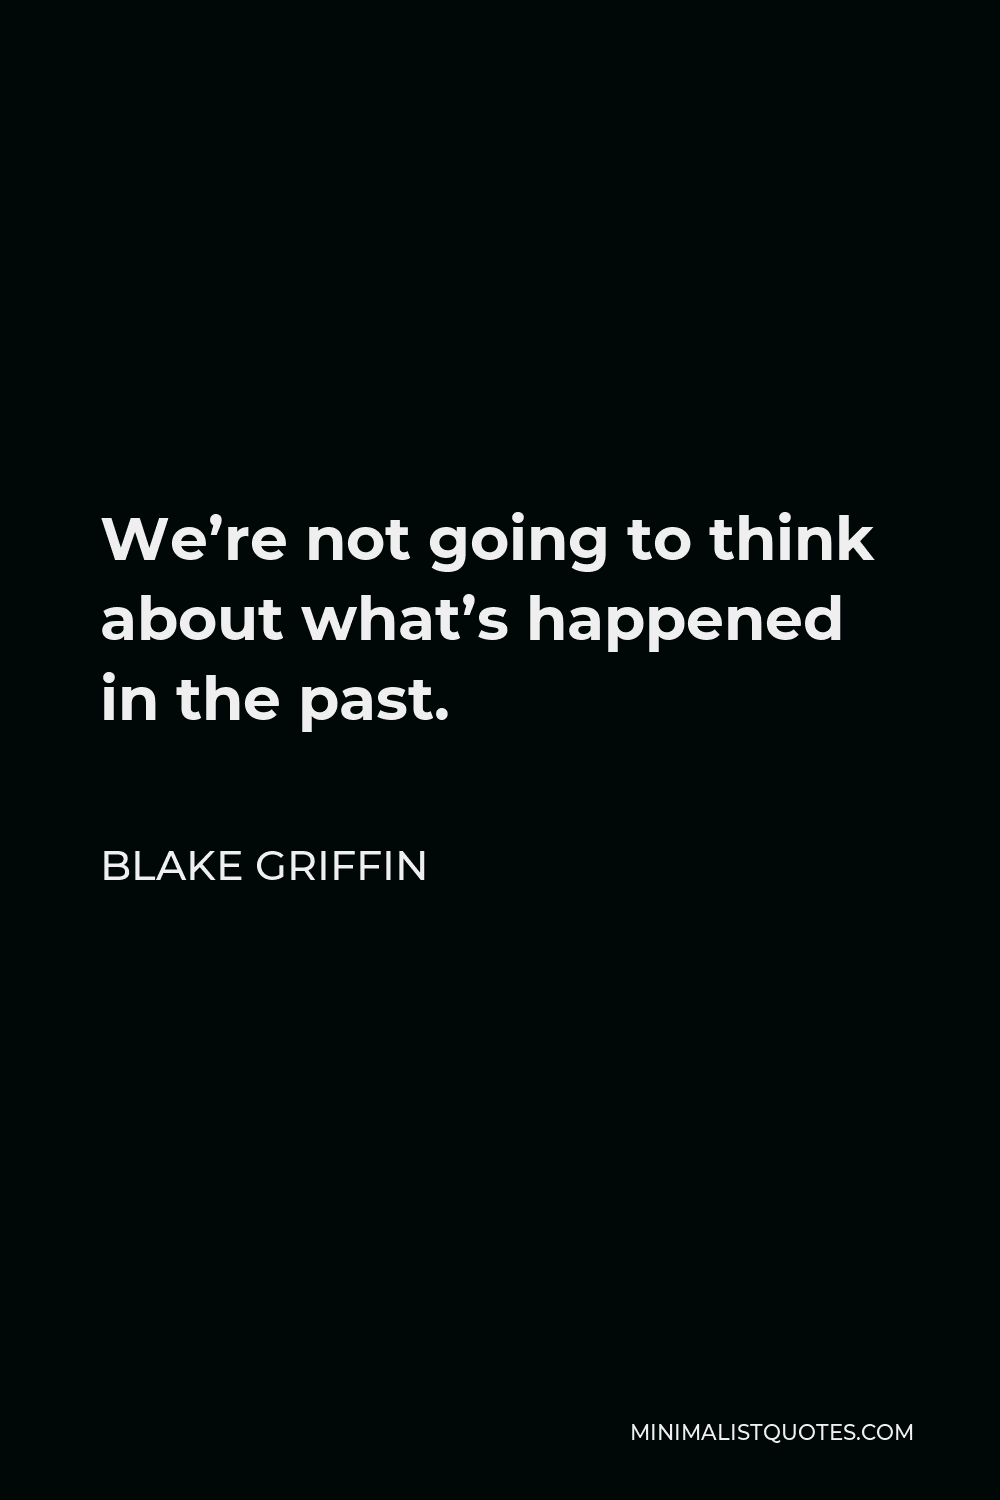 Blake Griffin Quote - We’re not going to think about what’s happened in the past.